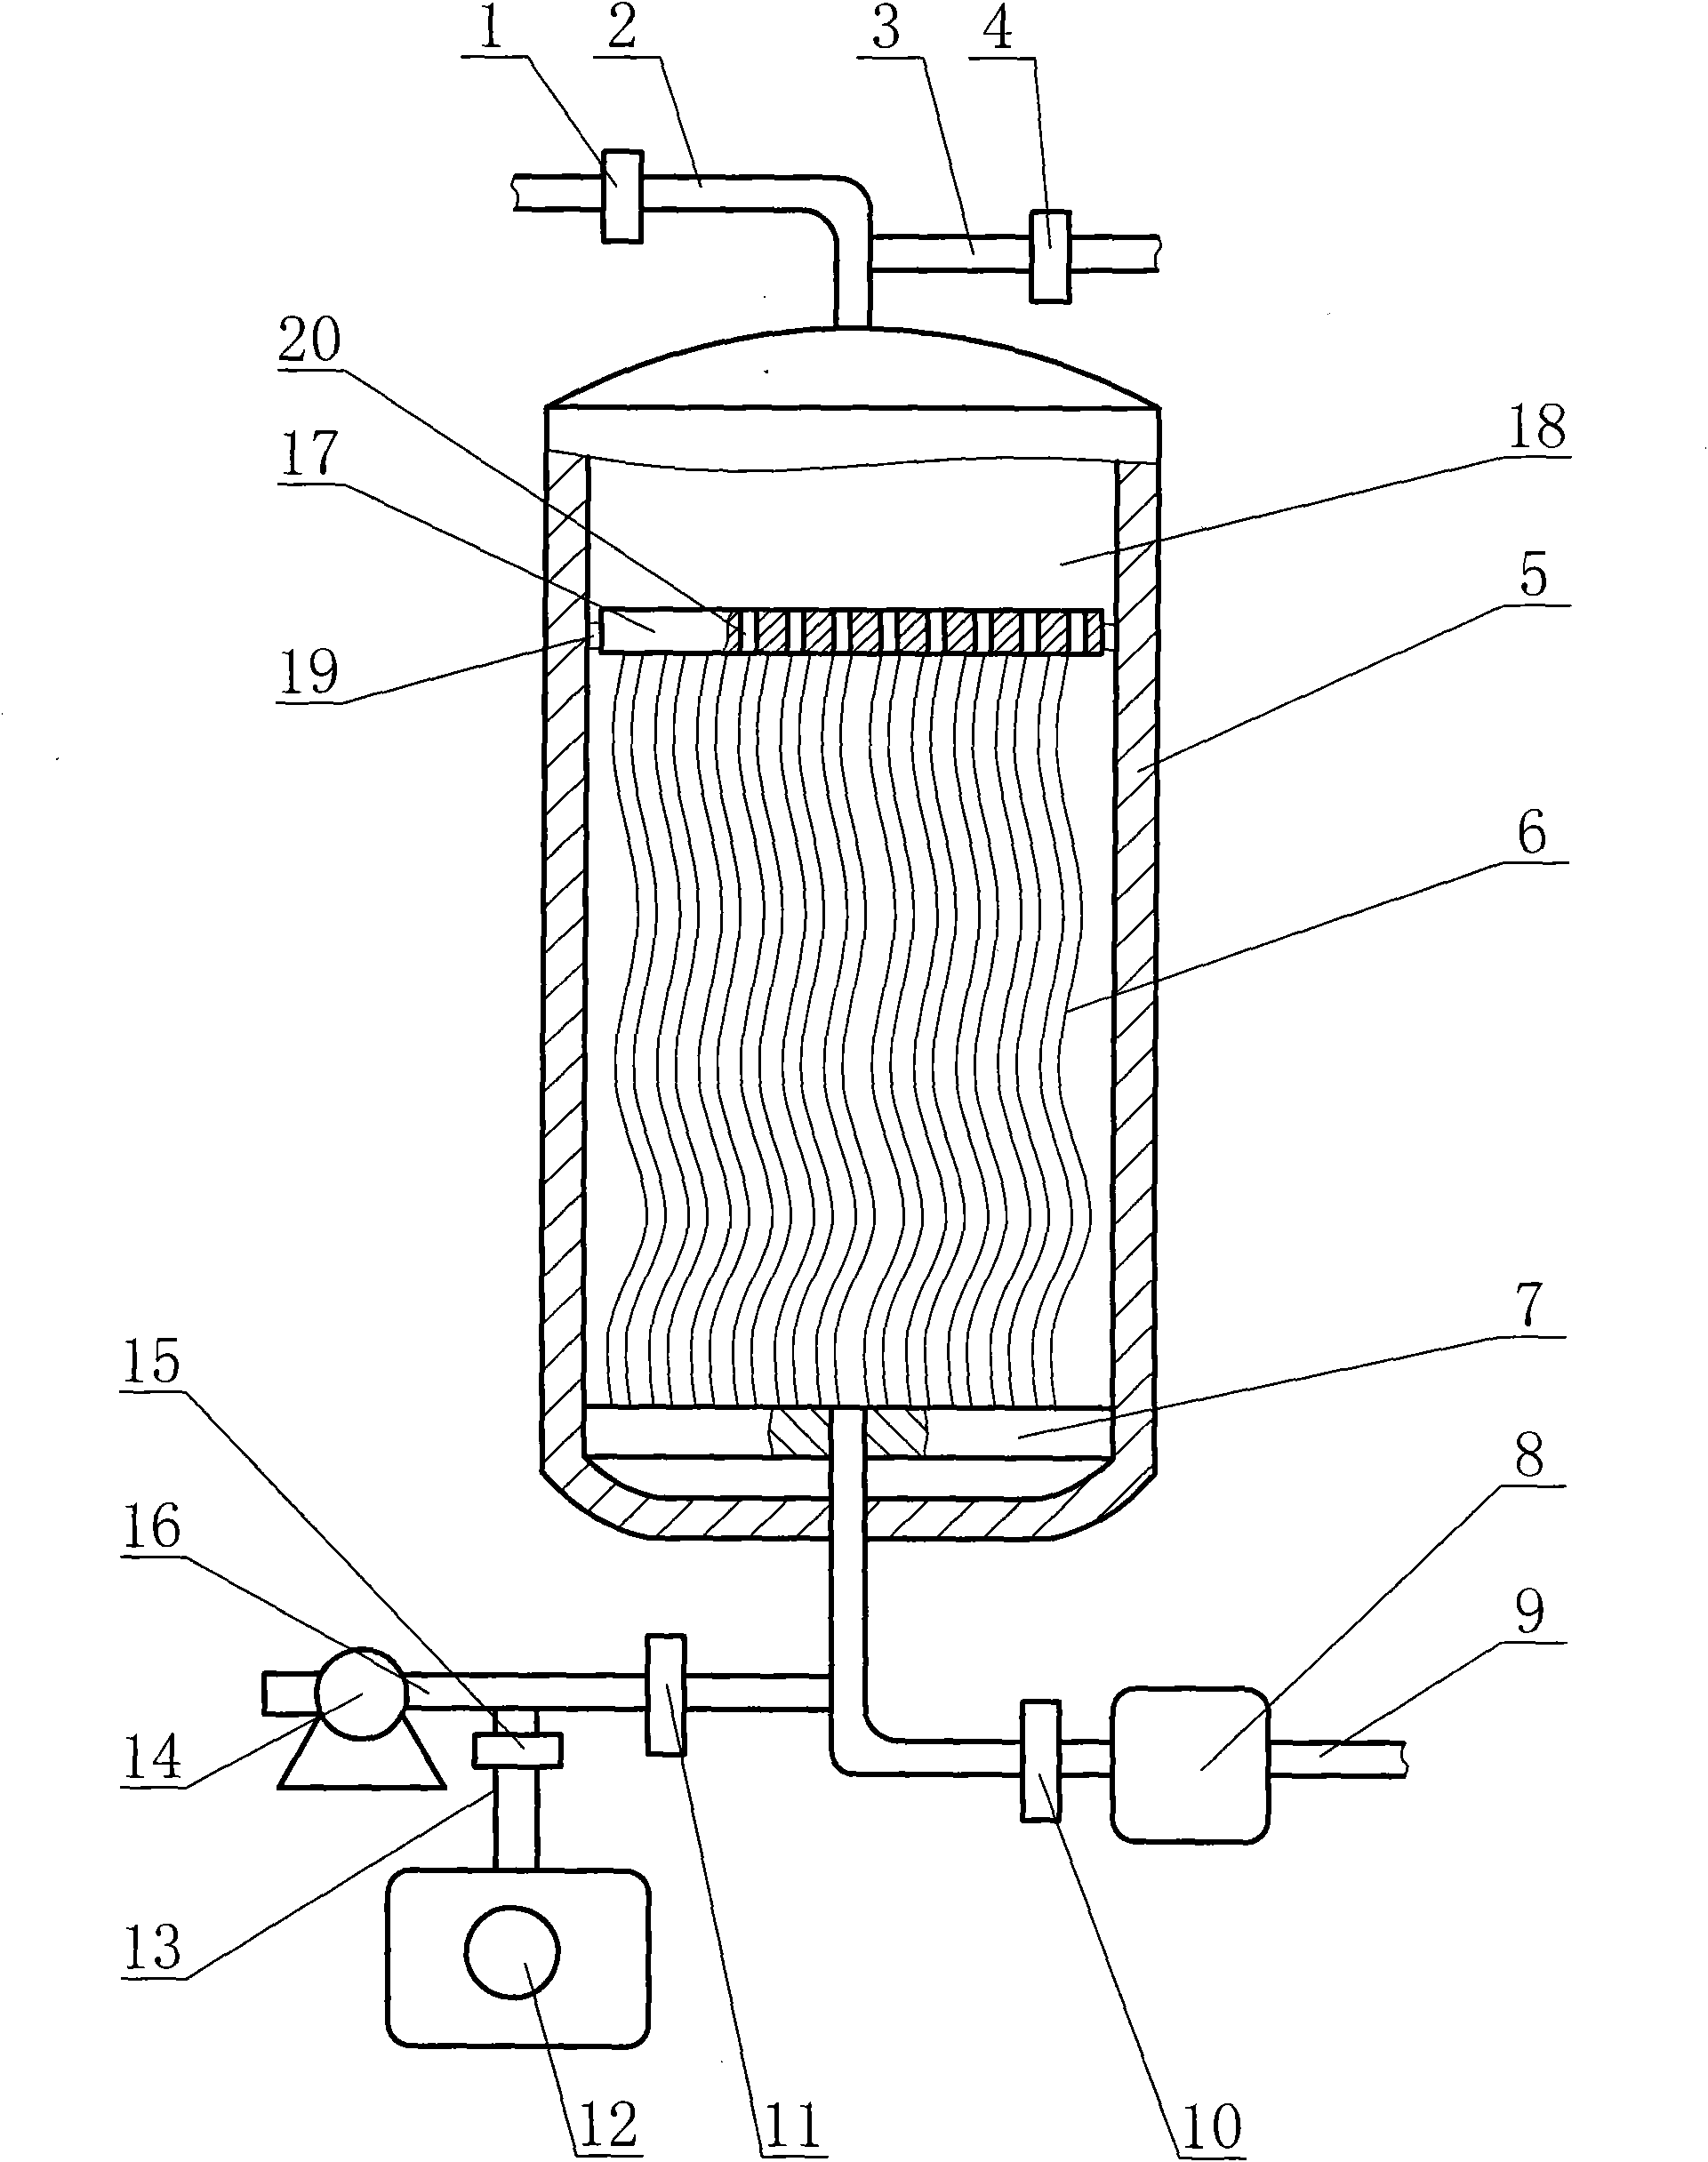 Ultra micro-filter device with variable aperture